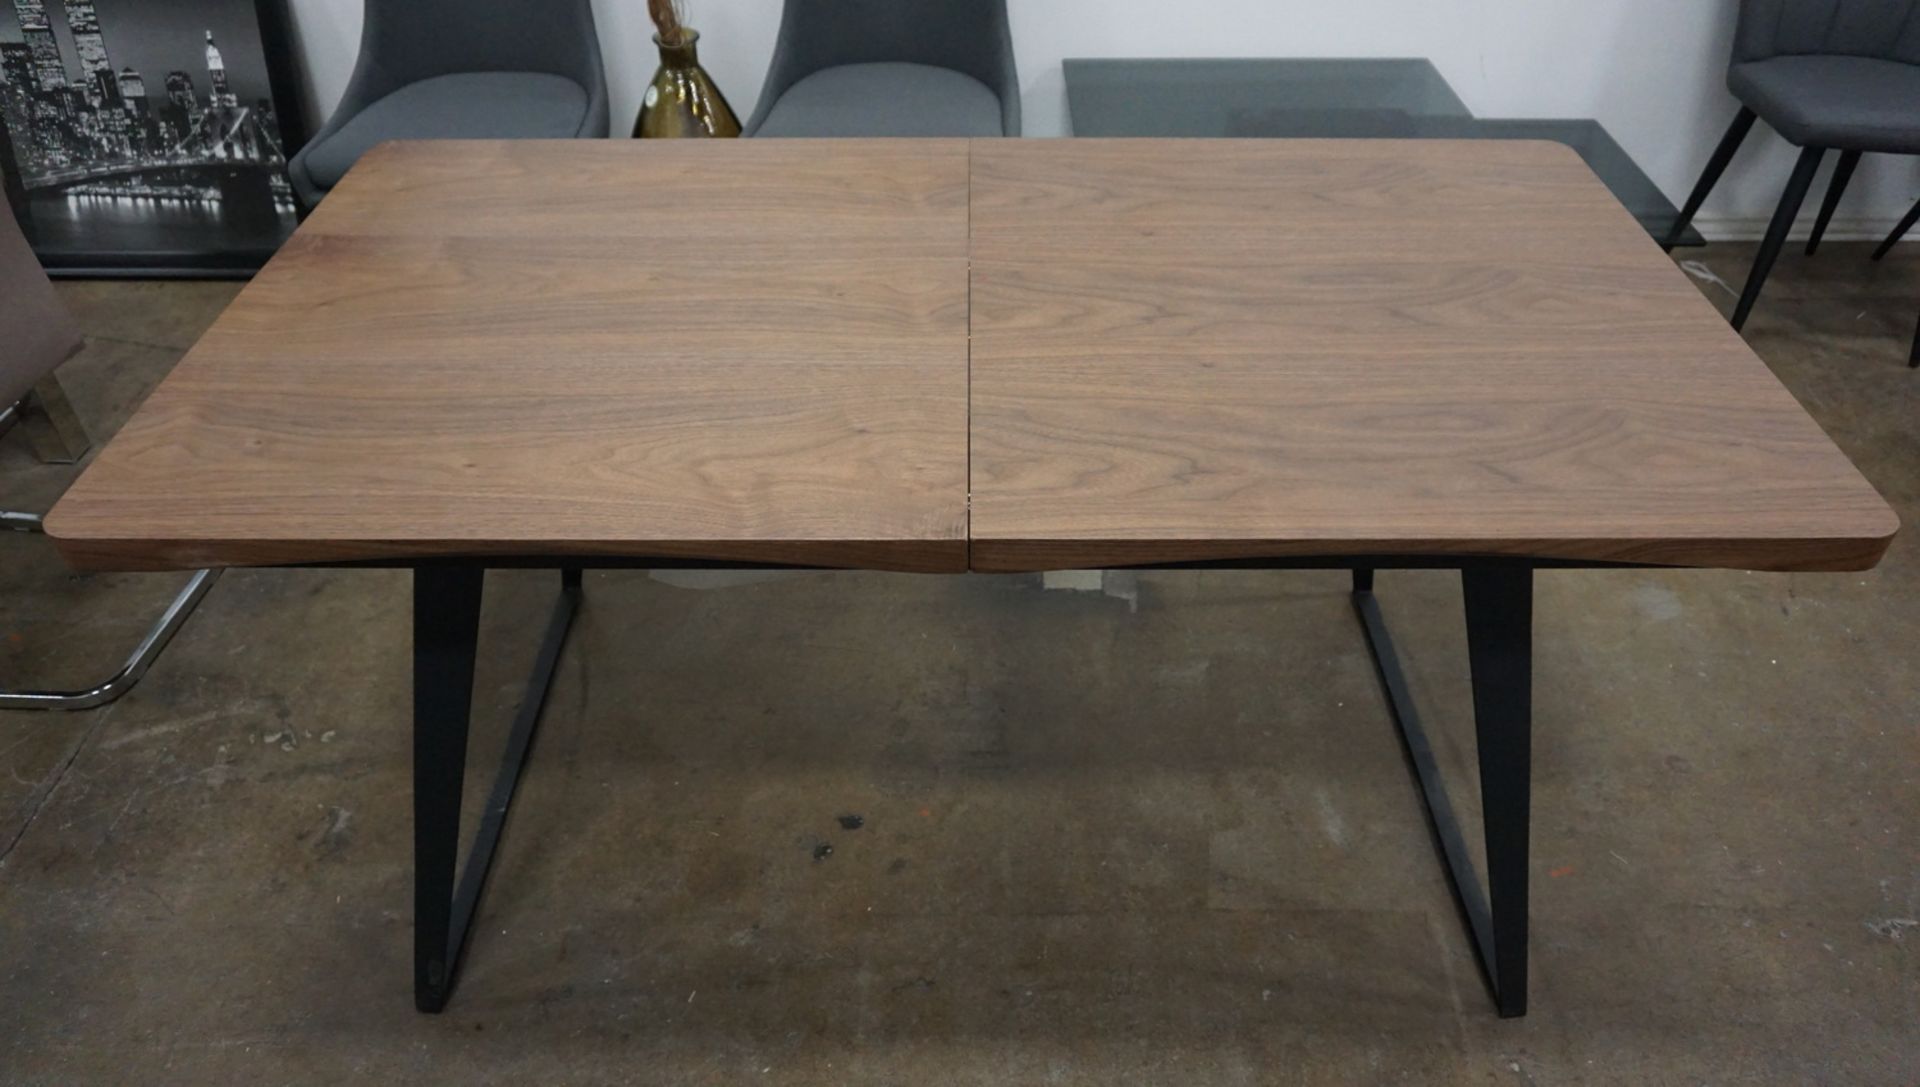 WOOD VENEER APPROX. 59"L X 39.5"W X 30"H EXTENDABLE DINING TABLE